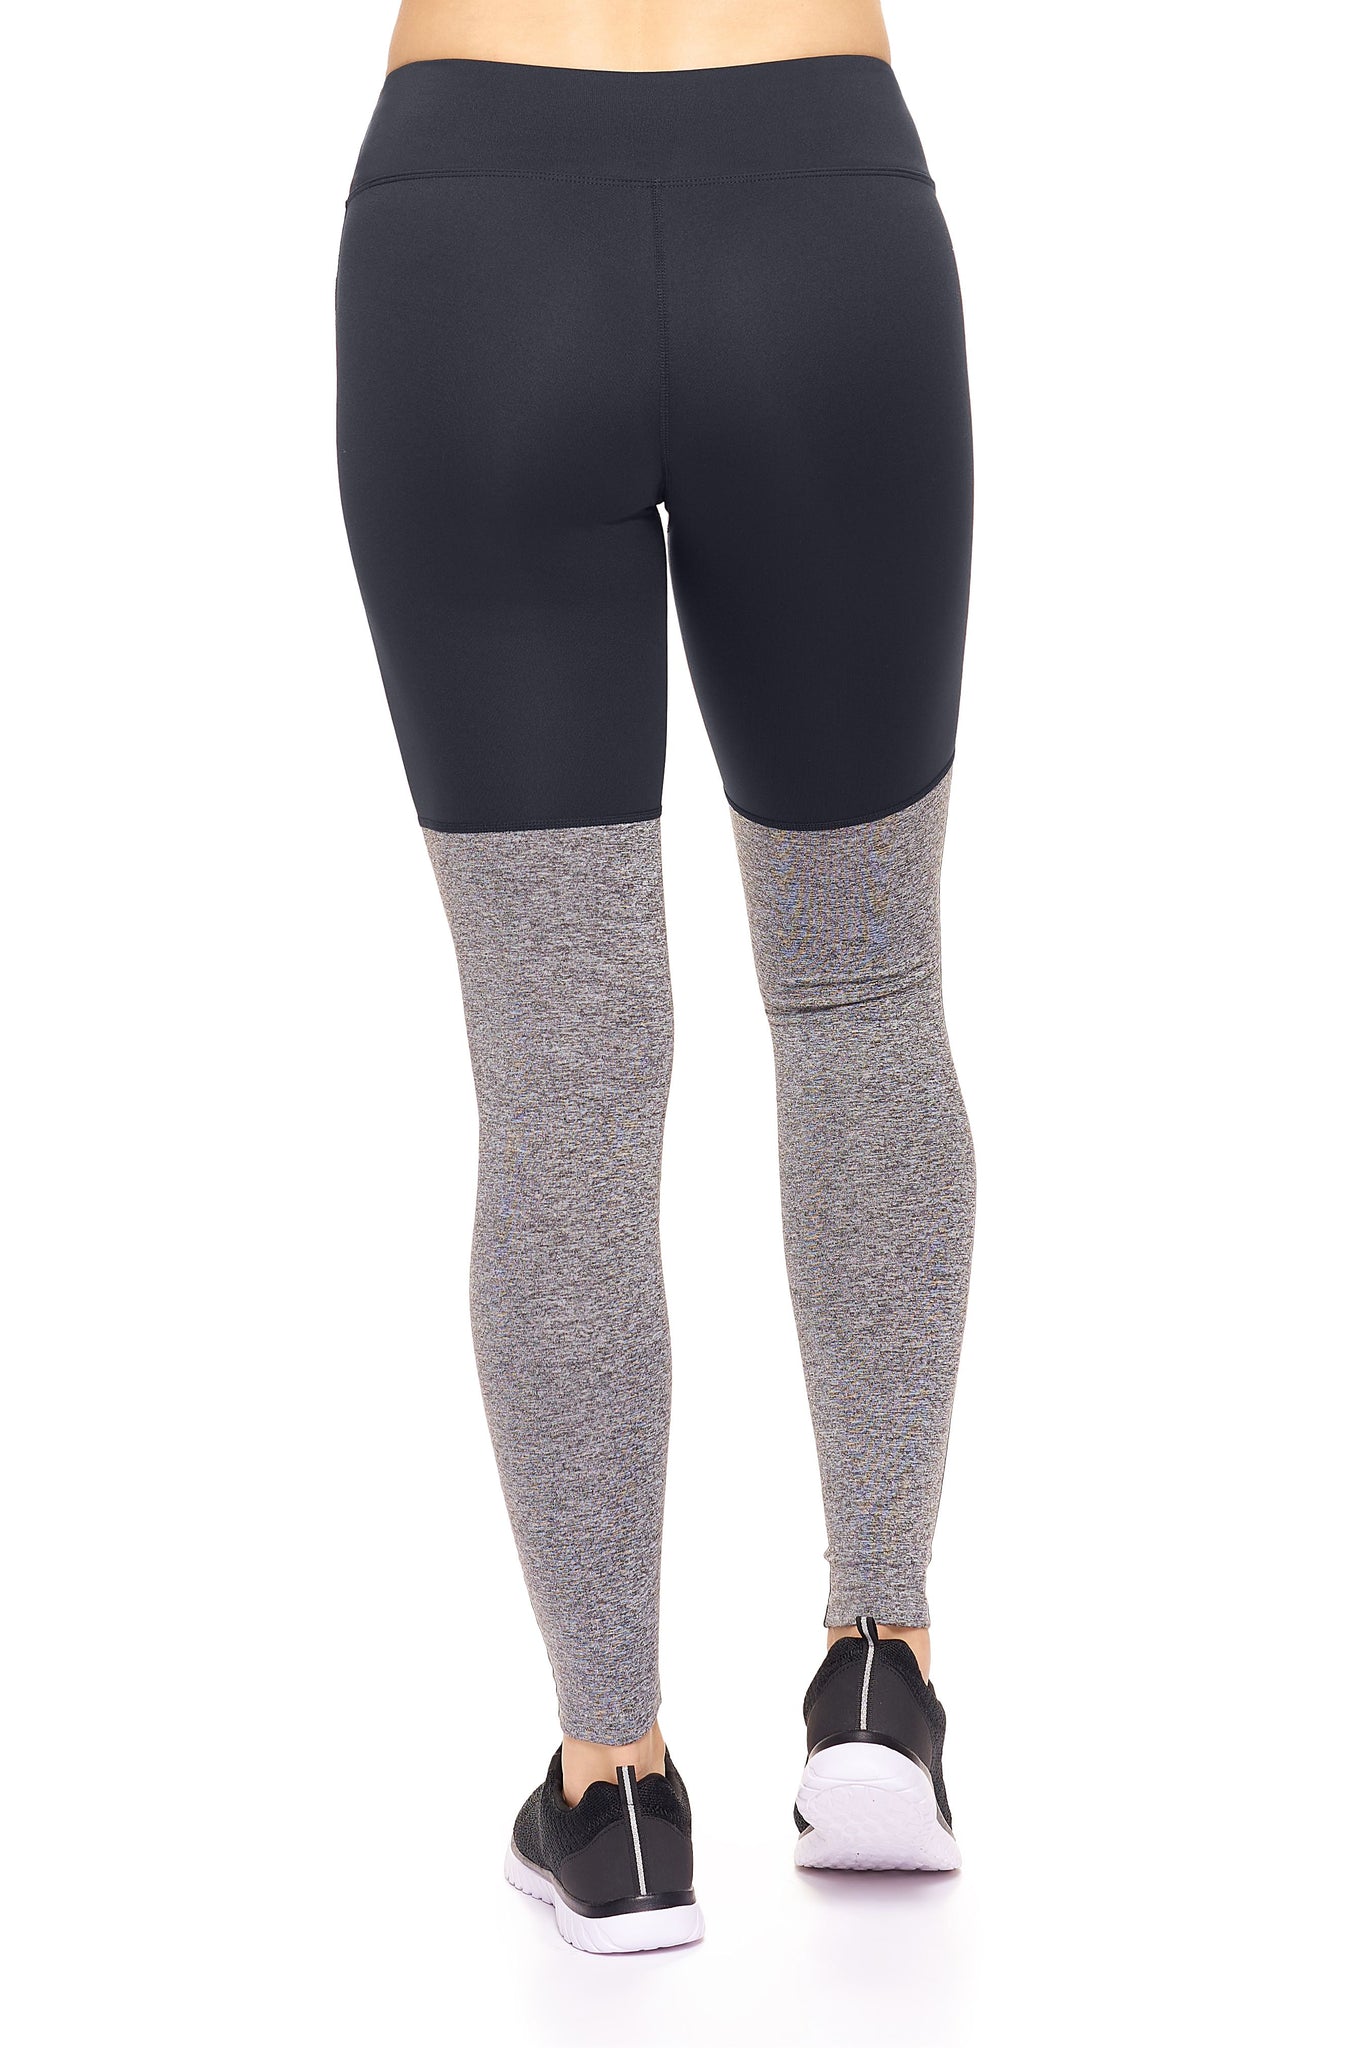 Expert Brand Wholesale Mid-Rise Heather Colorblock Leggings in Black Heather Charcoal Image3#black-heather-charcoal